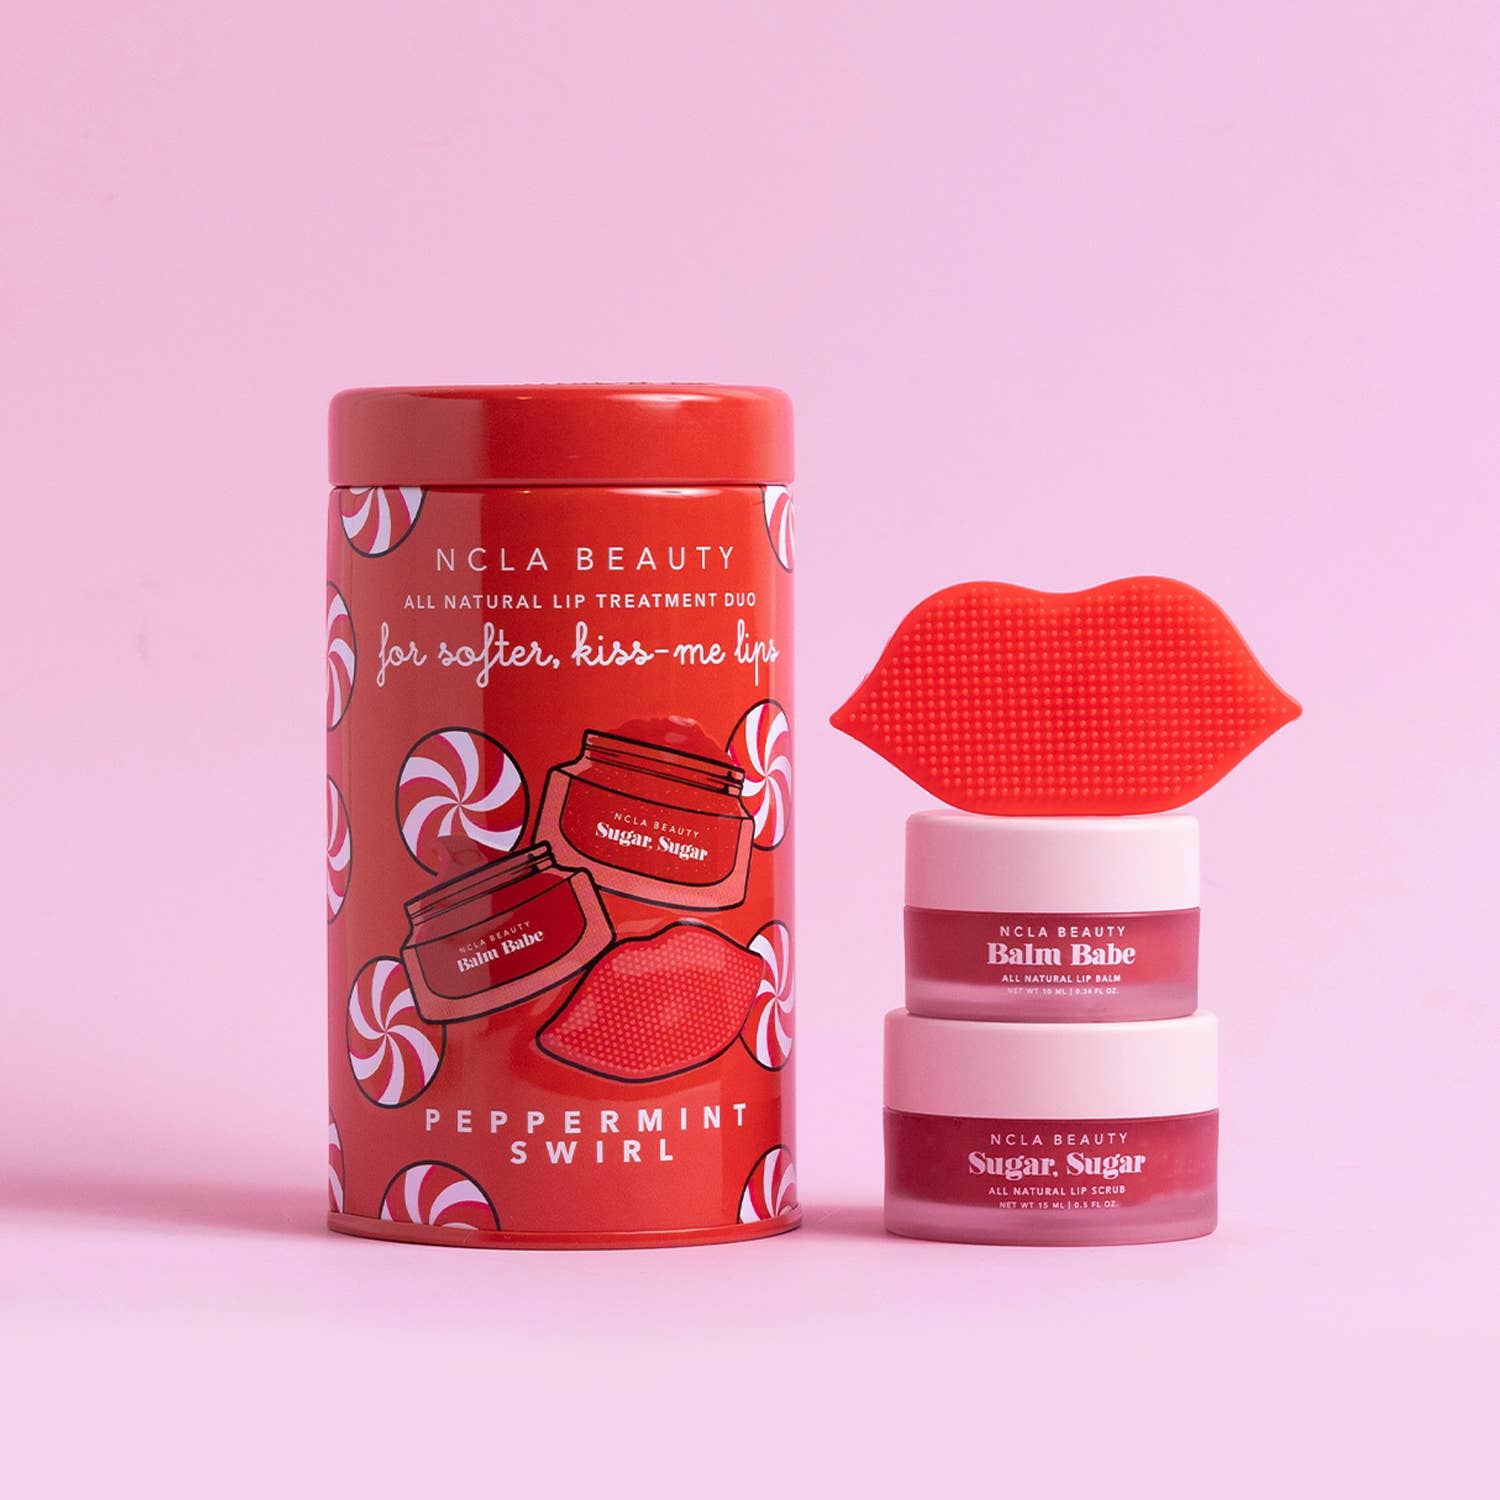 Peppermint Swirl Lip Care Holiday Gift Set - Floret + Foliage Flower delivery in Fargo, North Dakota